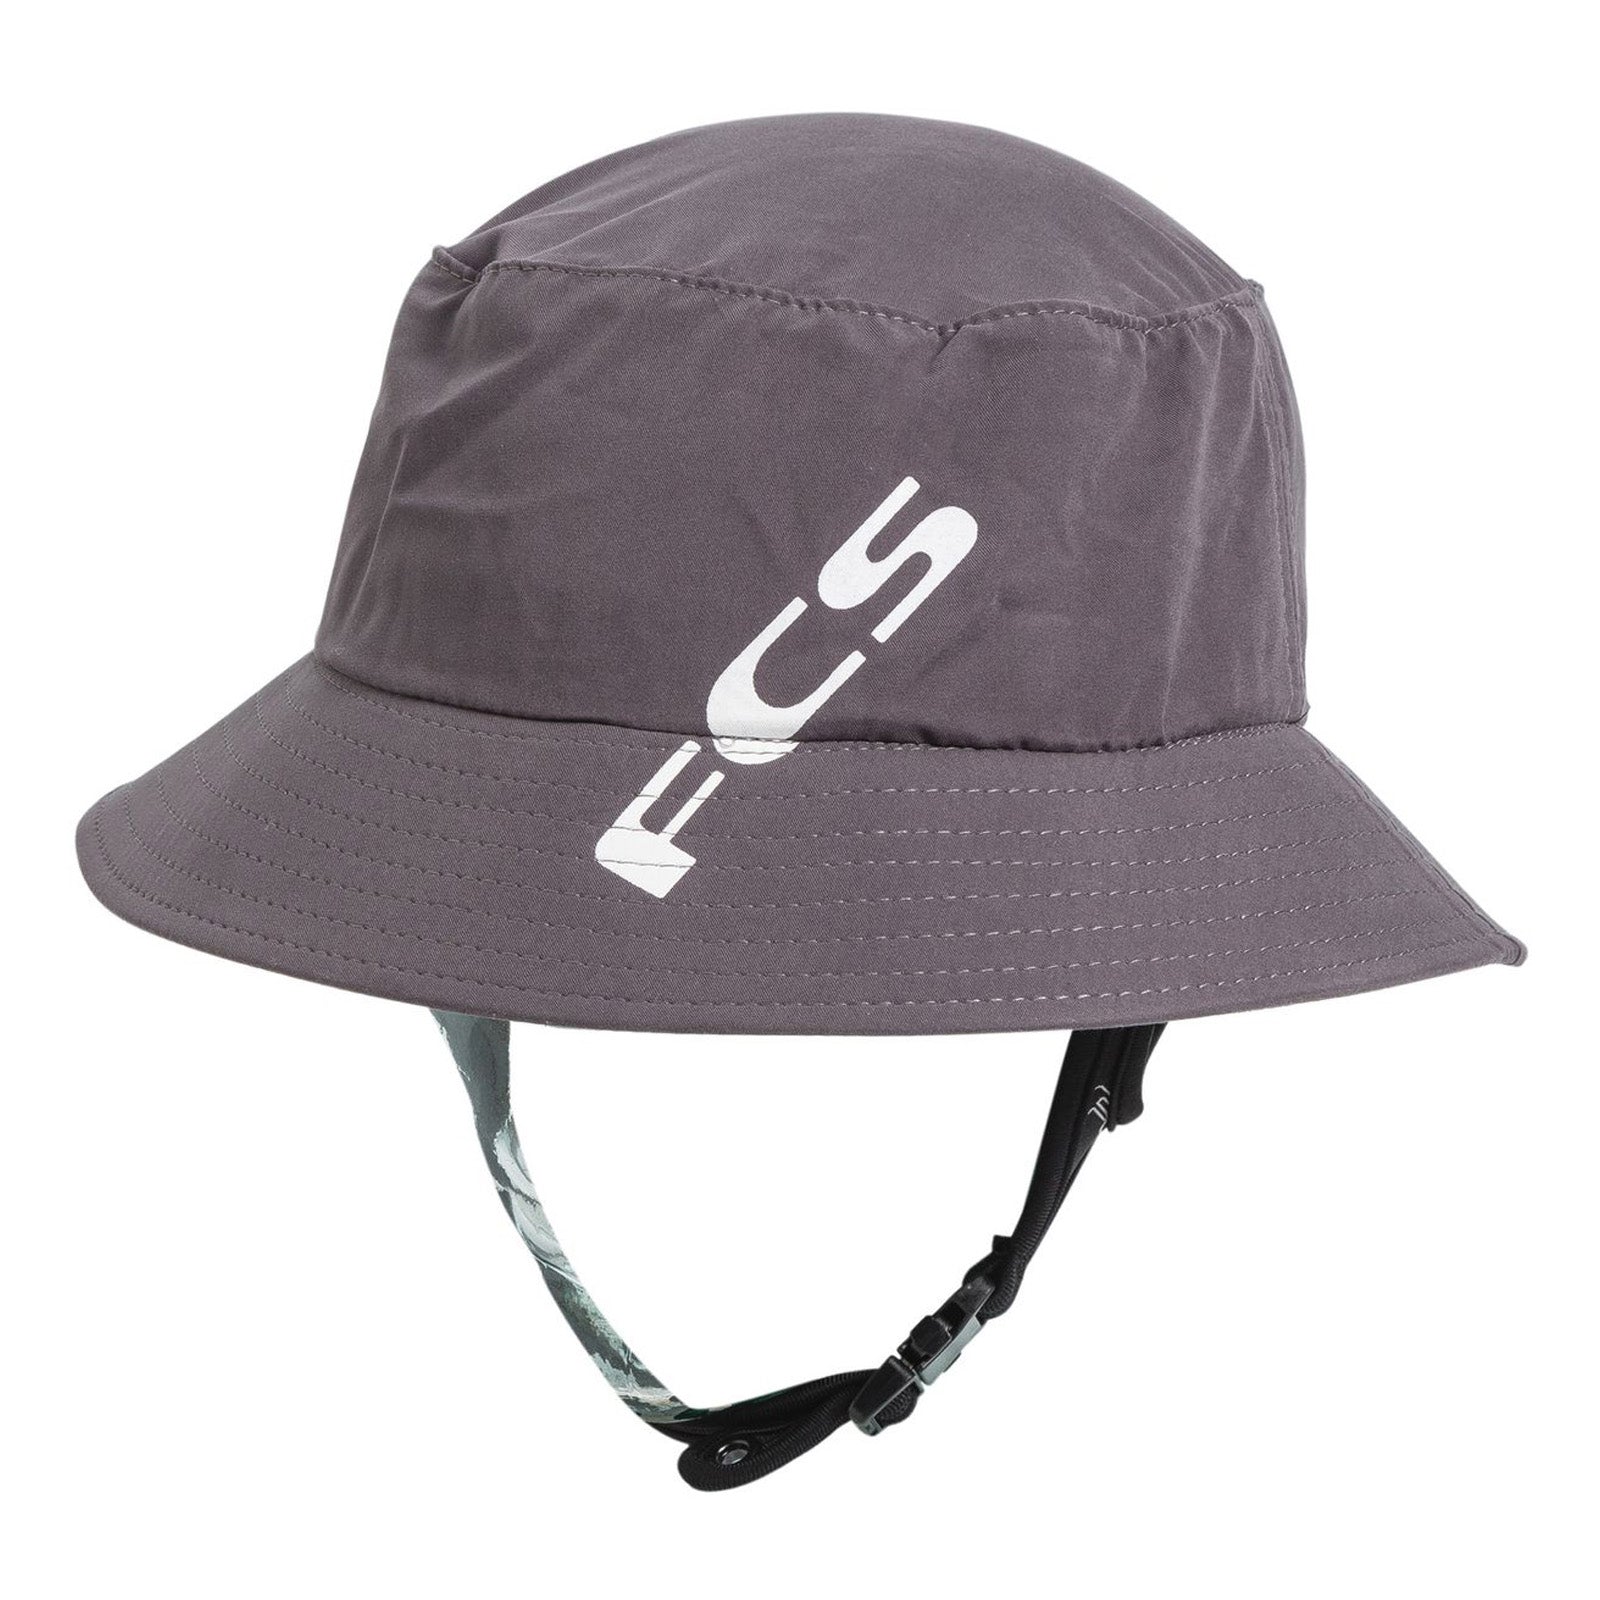 FCS Wet Bucket Hat for surfing, this beach hat is perfect